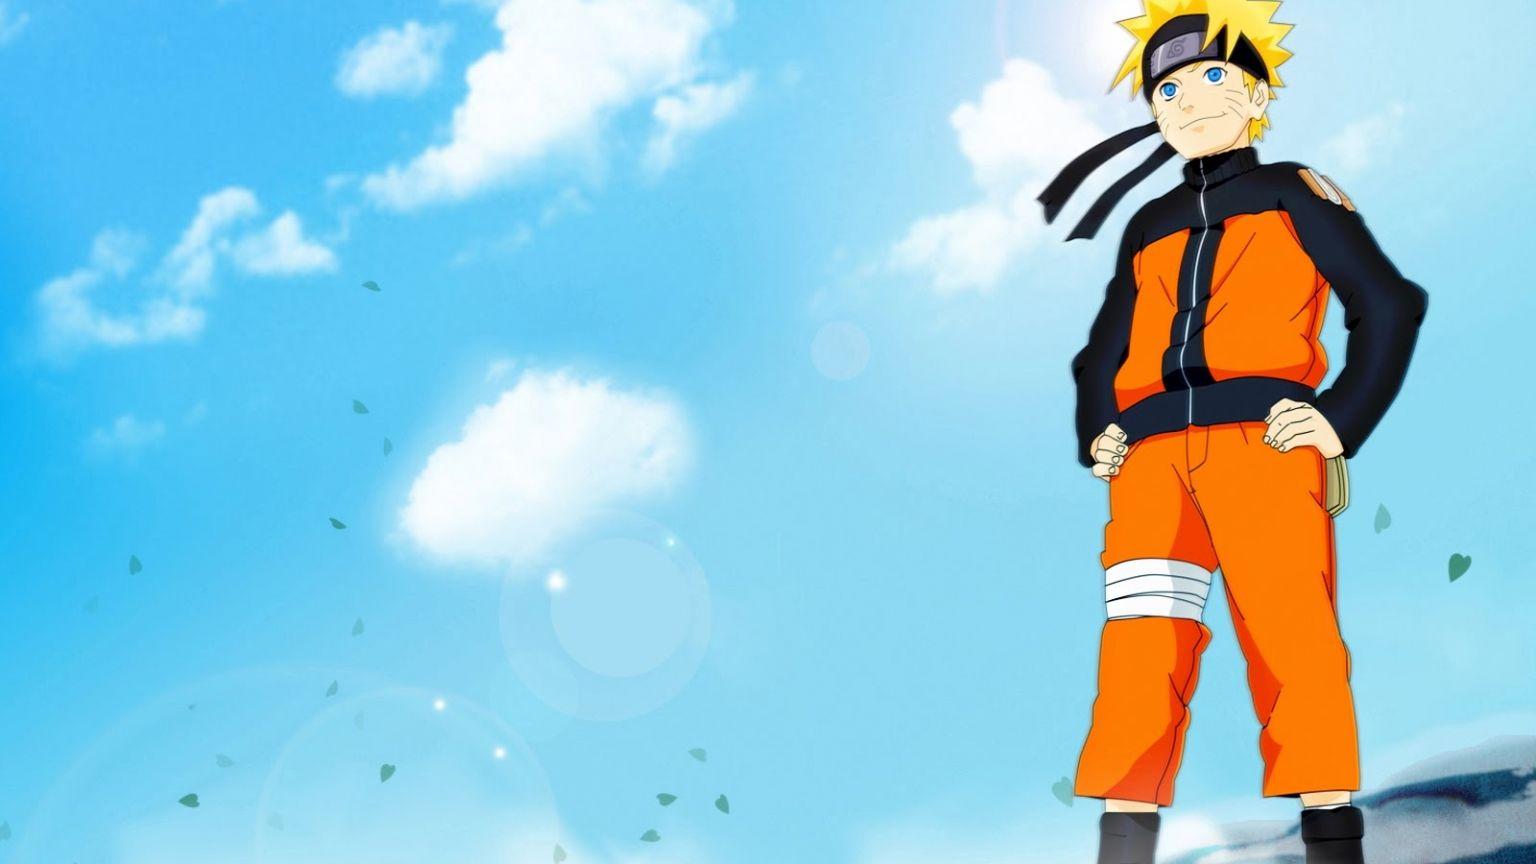 Naruto Aesthetic Computer Wallpapers Top Free Naruto Aesthetic Computer Backgrounds Wallpaperaccess